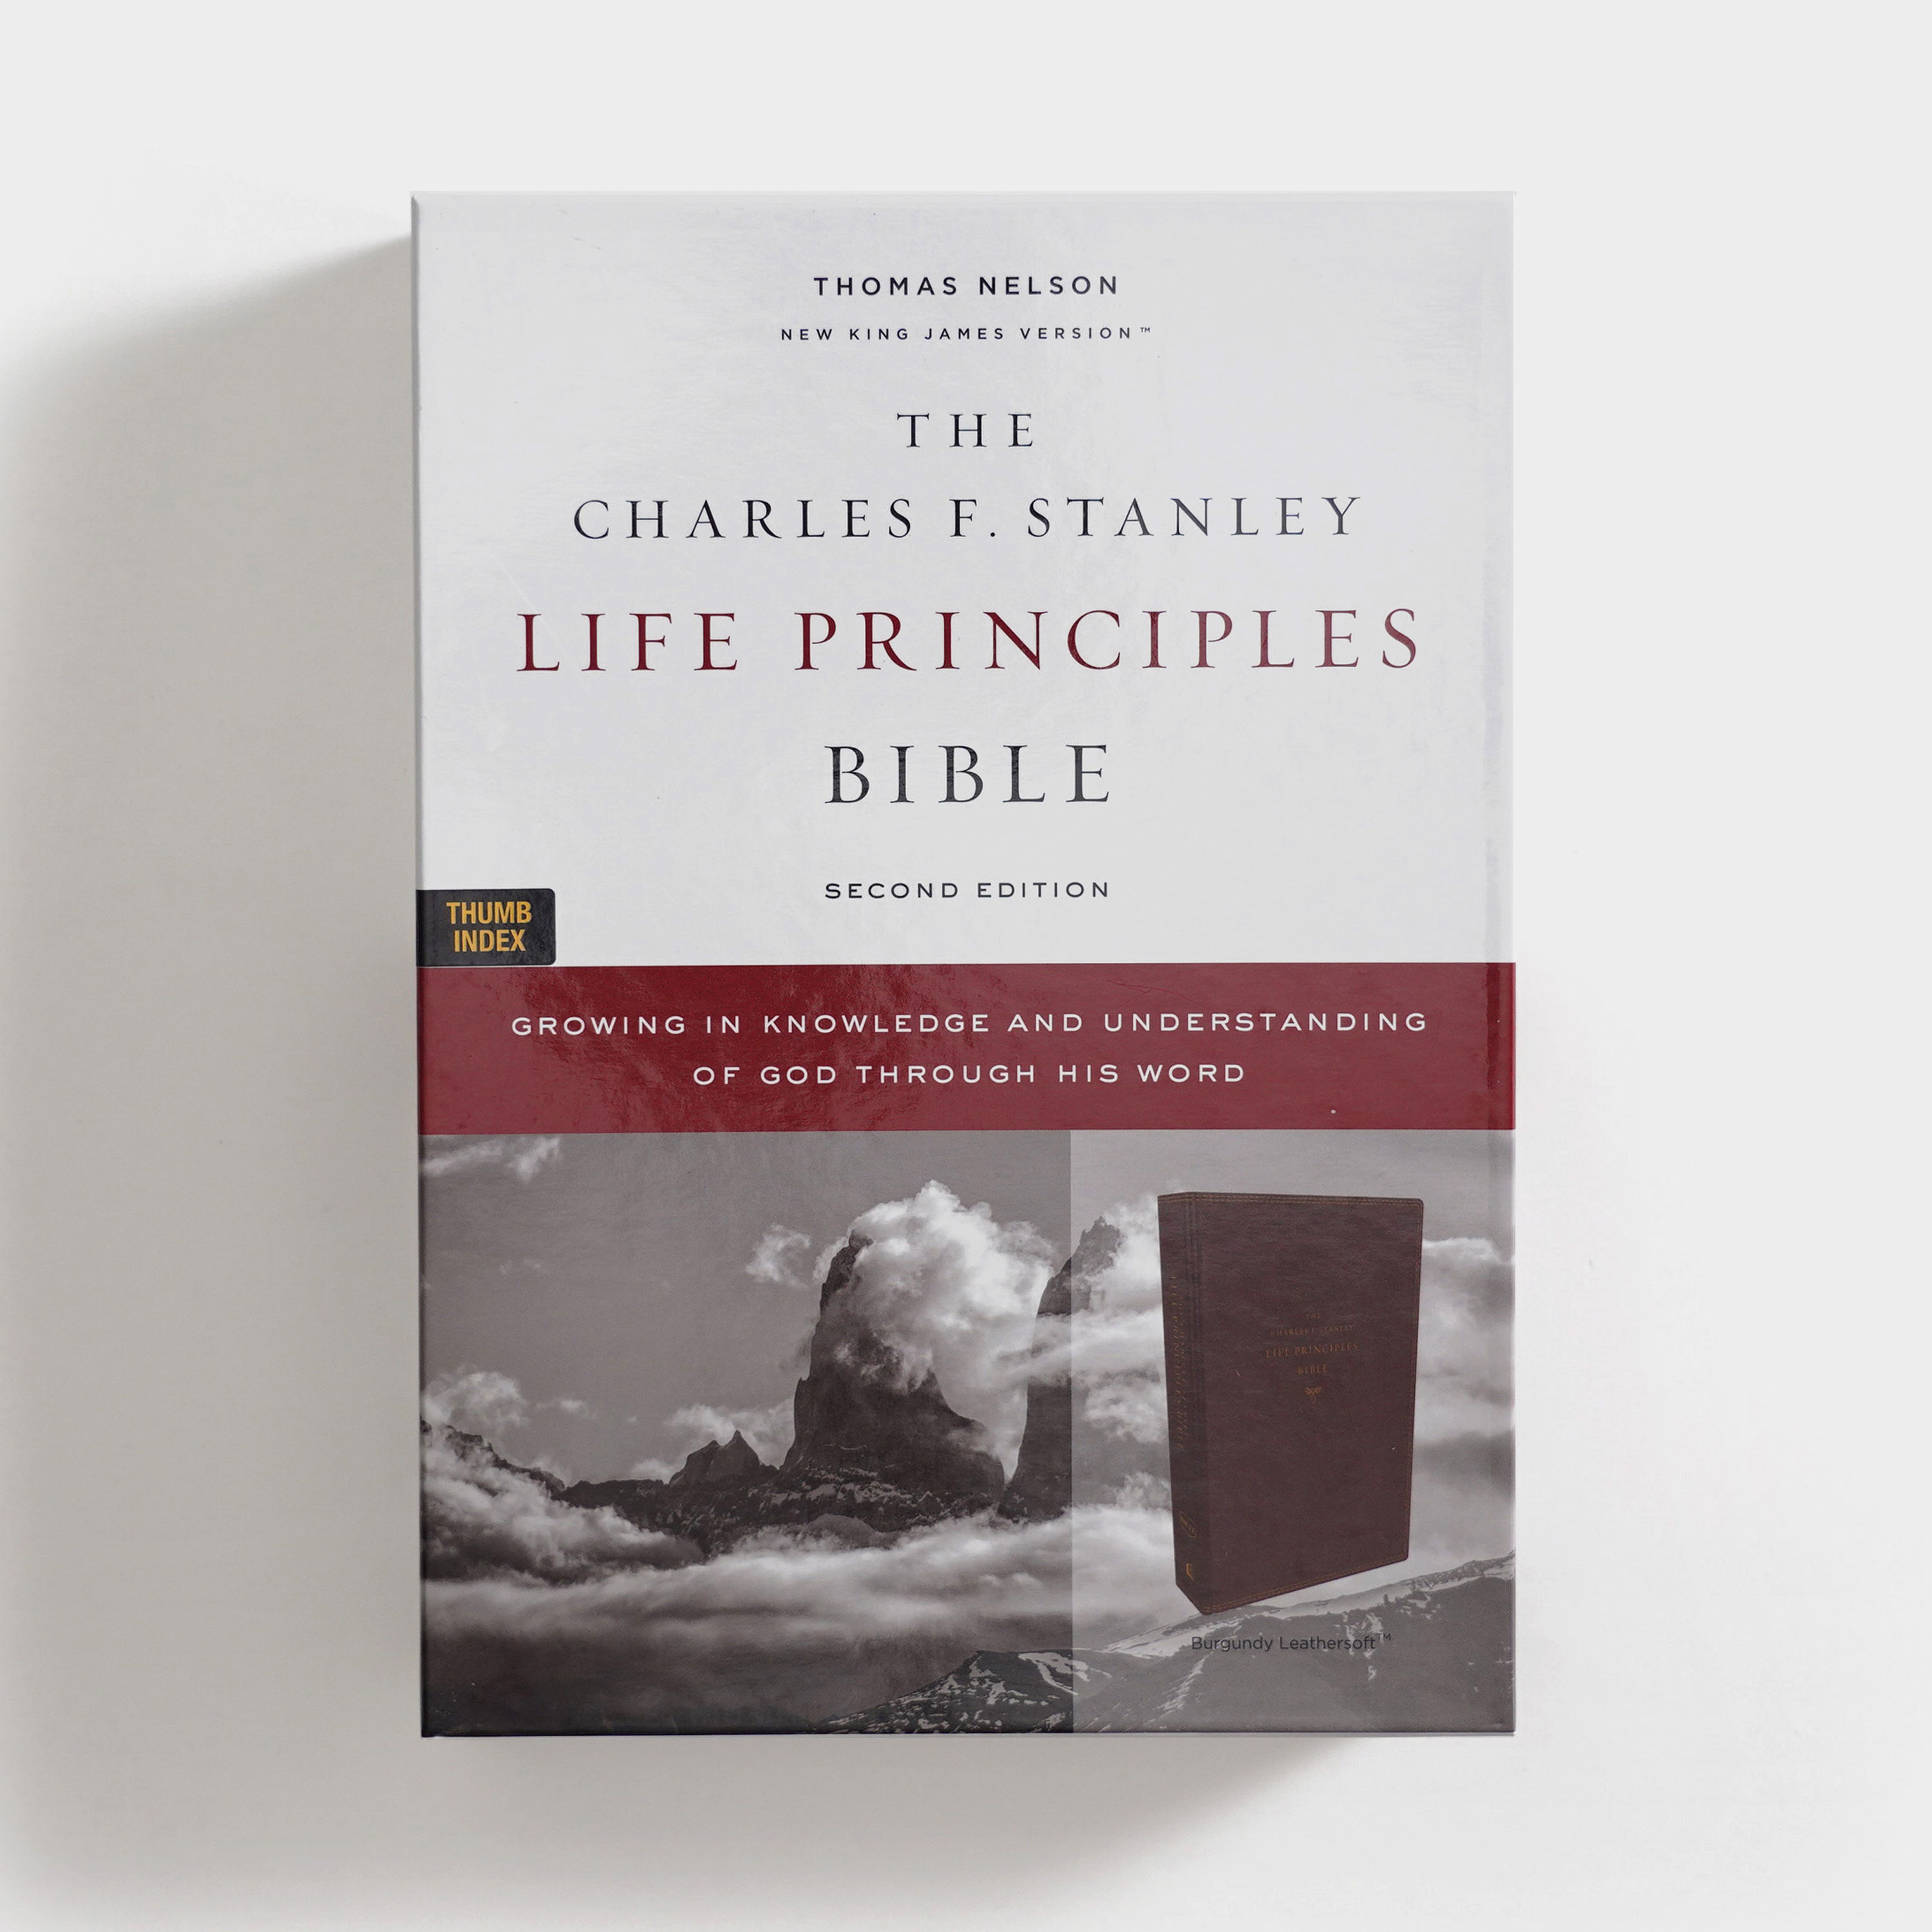 The Charles F. Stanley Life Principles Bible 2nd Edition, NKJV - Burgundy Leathersoft Indexed